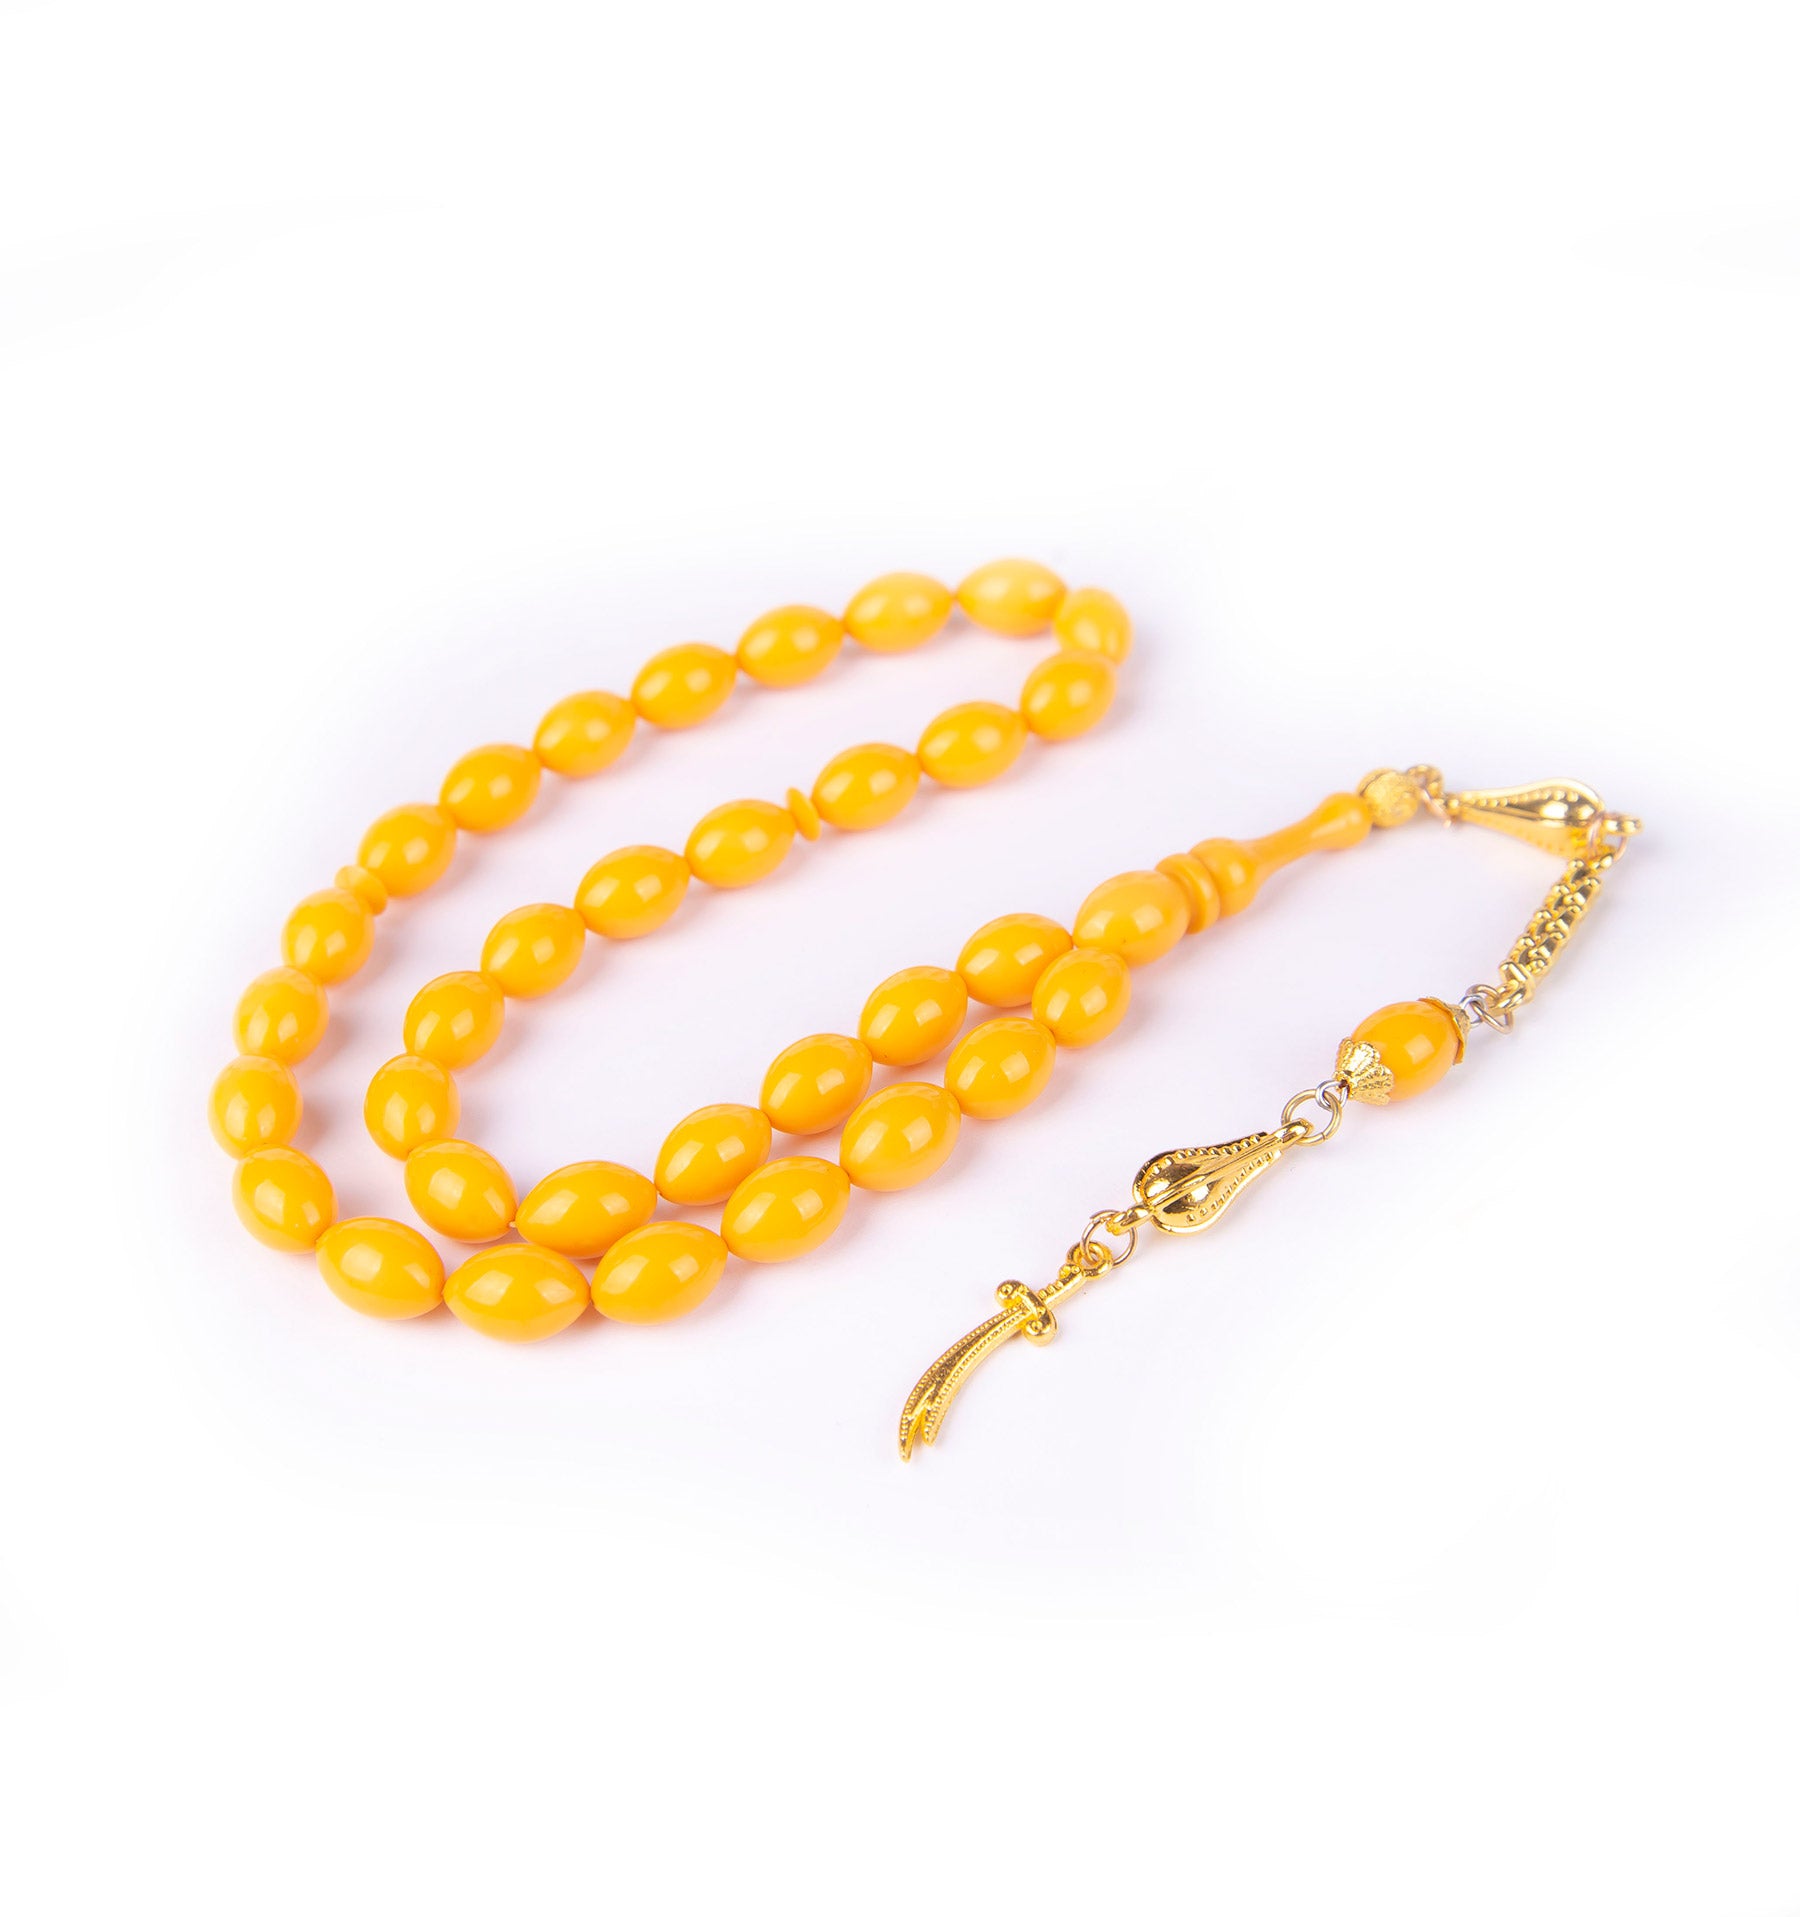 Systematic Solid Cut and Pressed Amber Prayer Beads 4